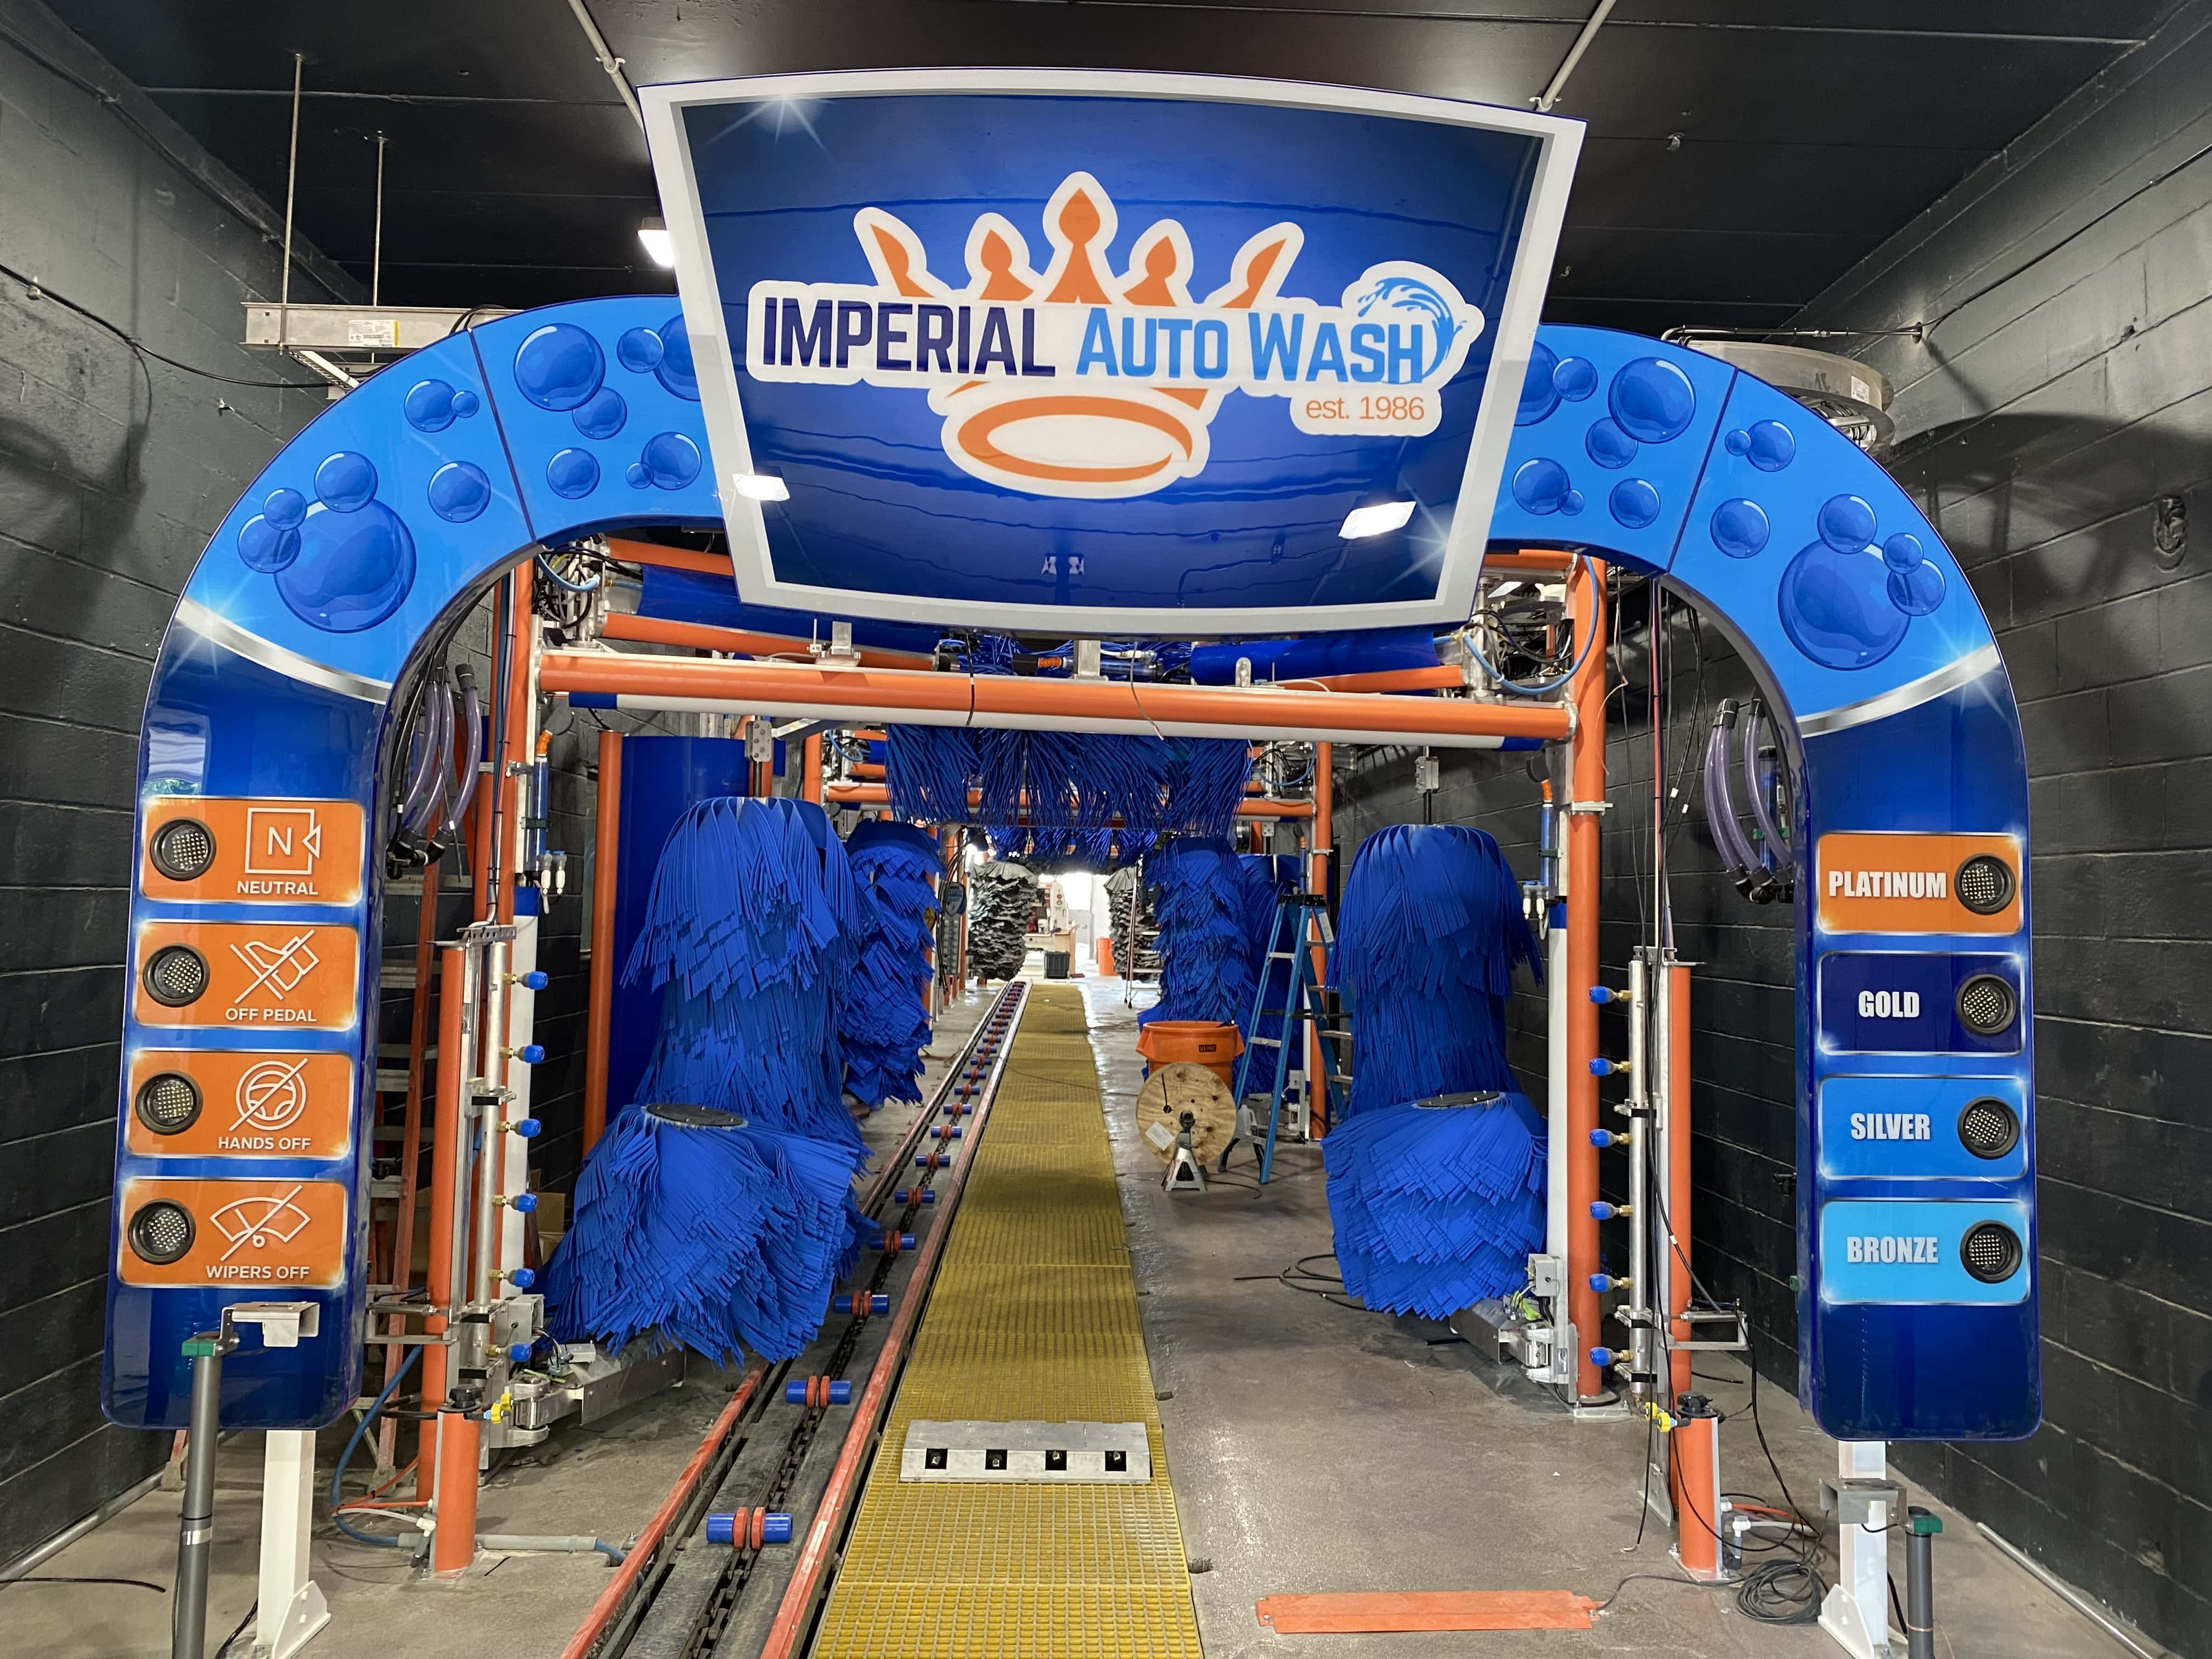 Imperial Auto Wash - Waterford Twp, MI, US, self service car wash